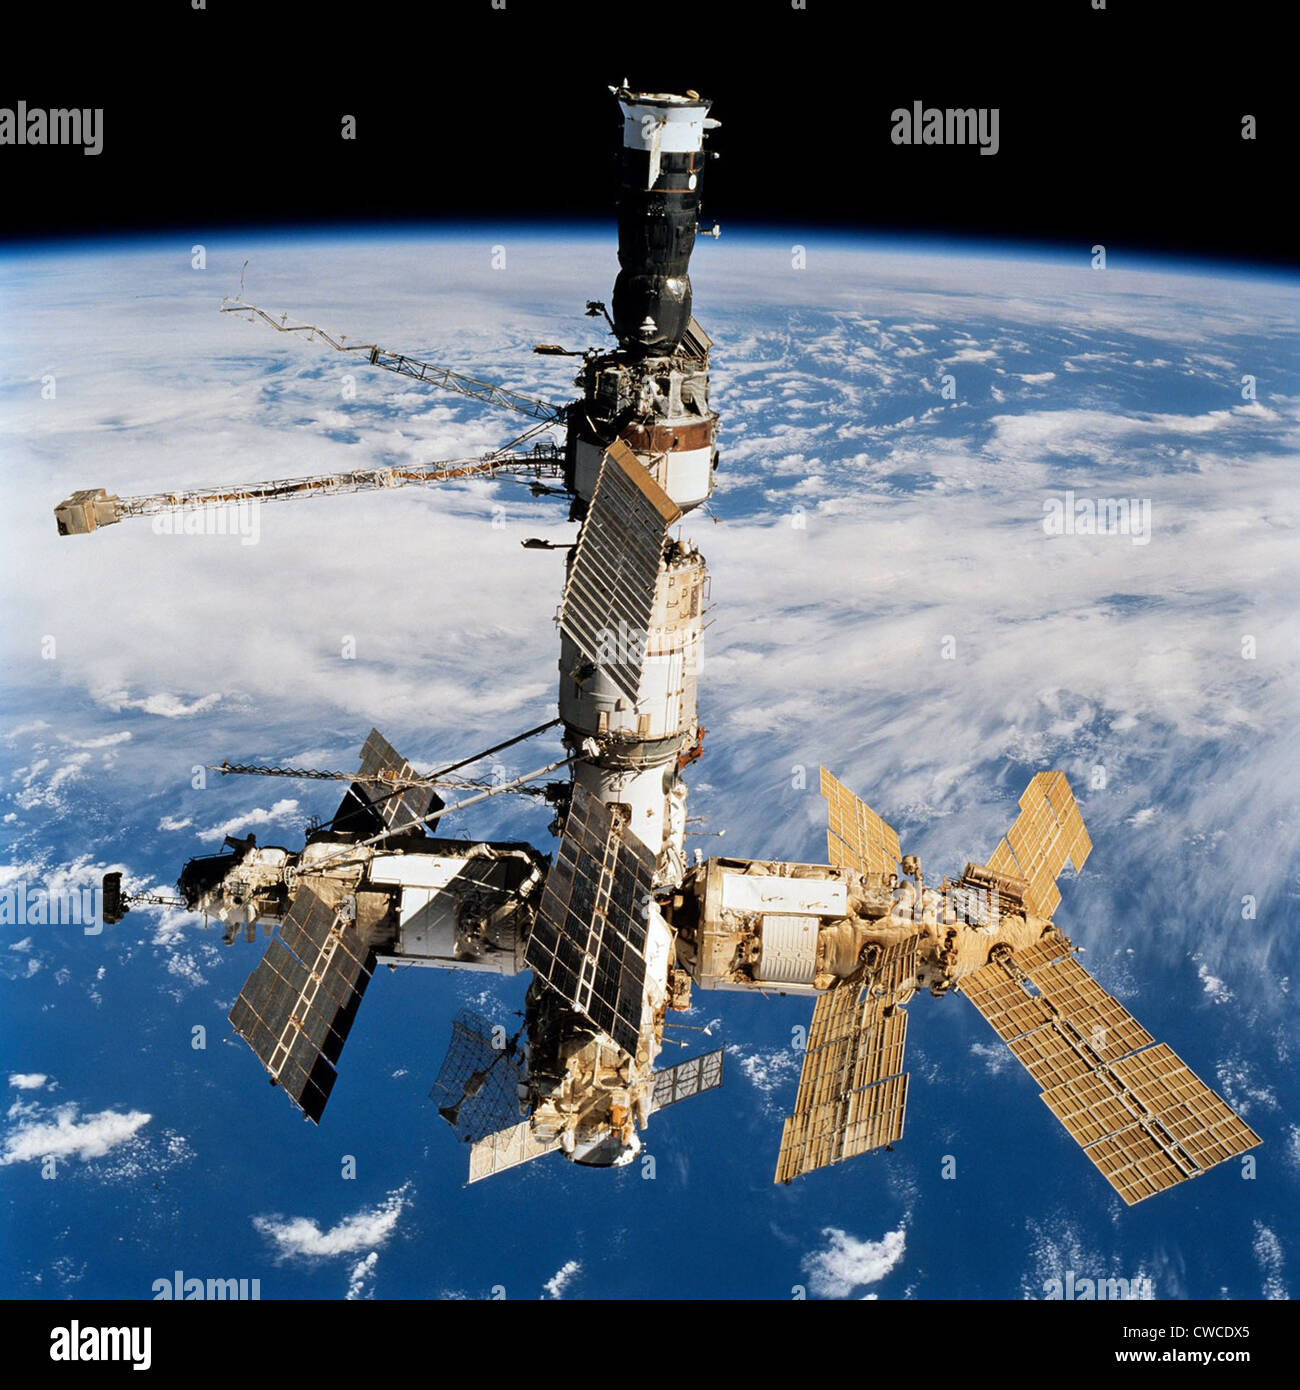 Russian Space Station Mir. Photo was taken by the crew of space